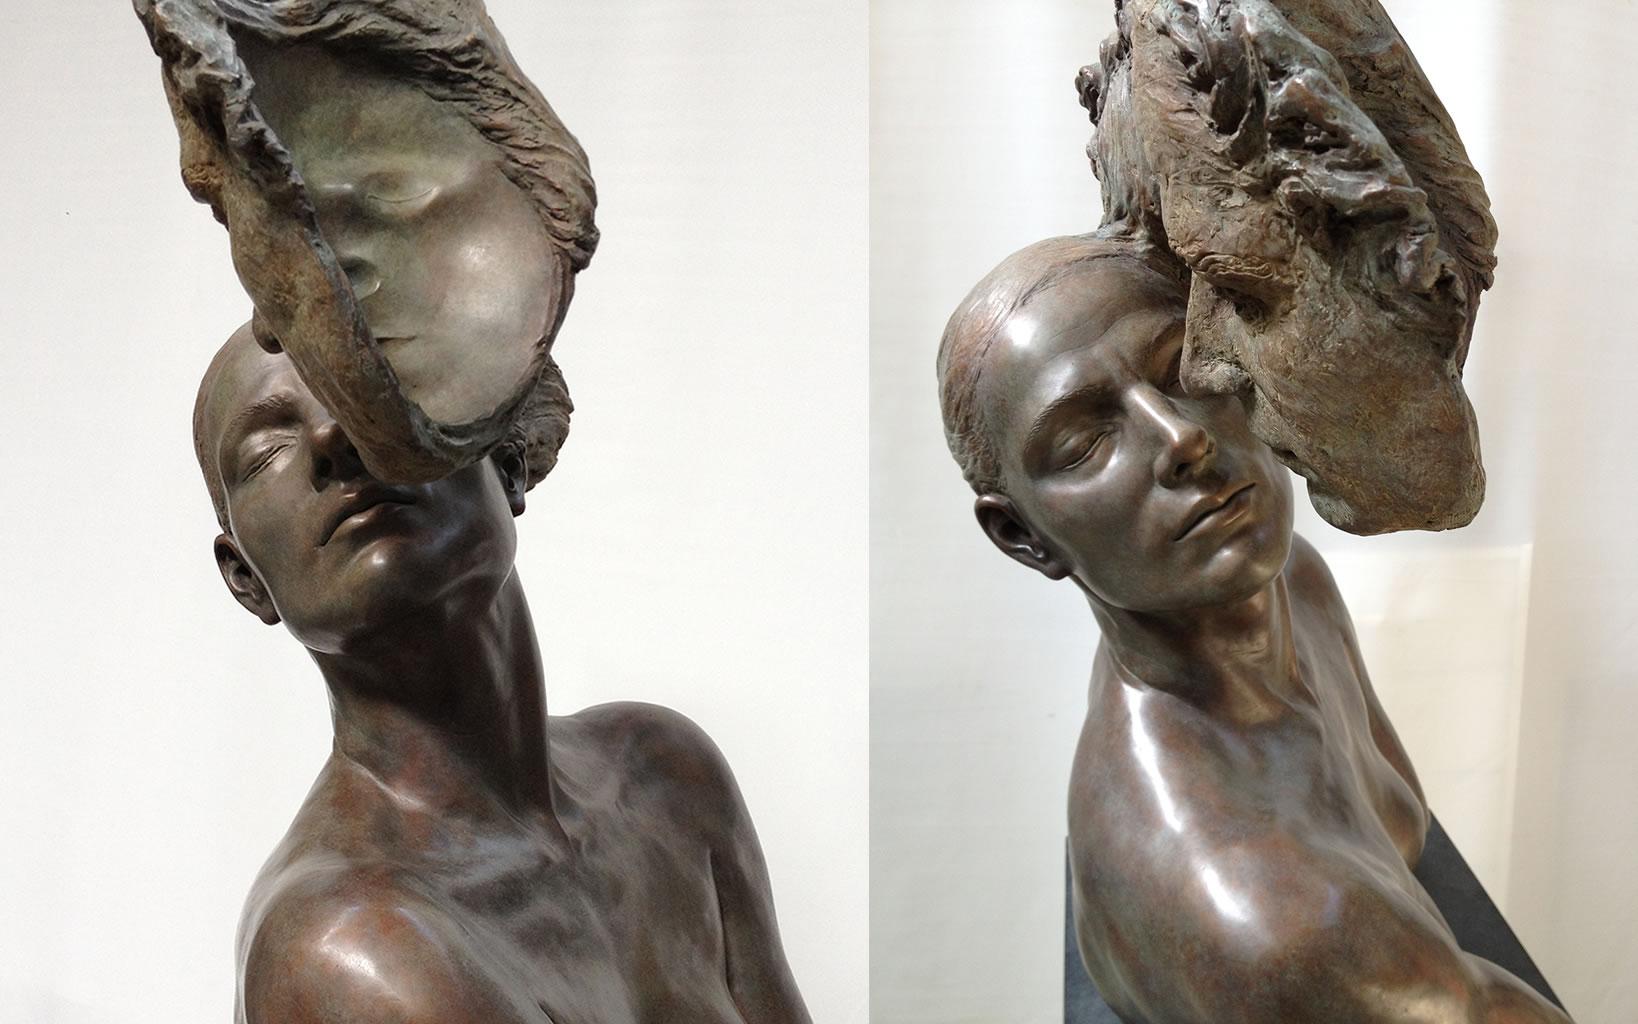 Anima Animus Bronze Sculpture Contemporary Connected

The sculptures of Margot Homan (1956, Oss) show a perfect command of the old craft of modelling and sculpting, with which she continually develops an age old tradition. In her artistic education